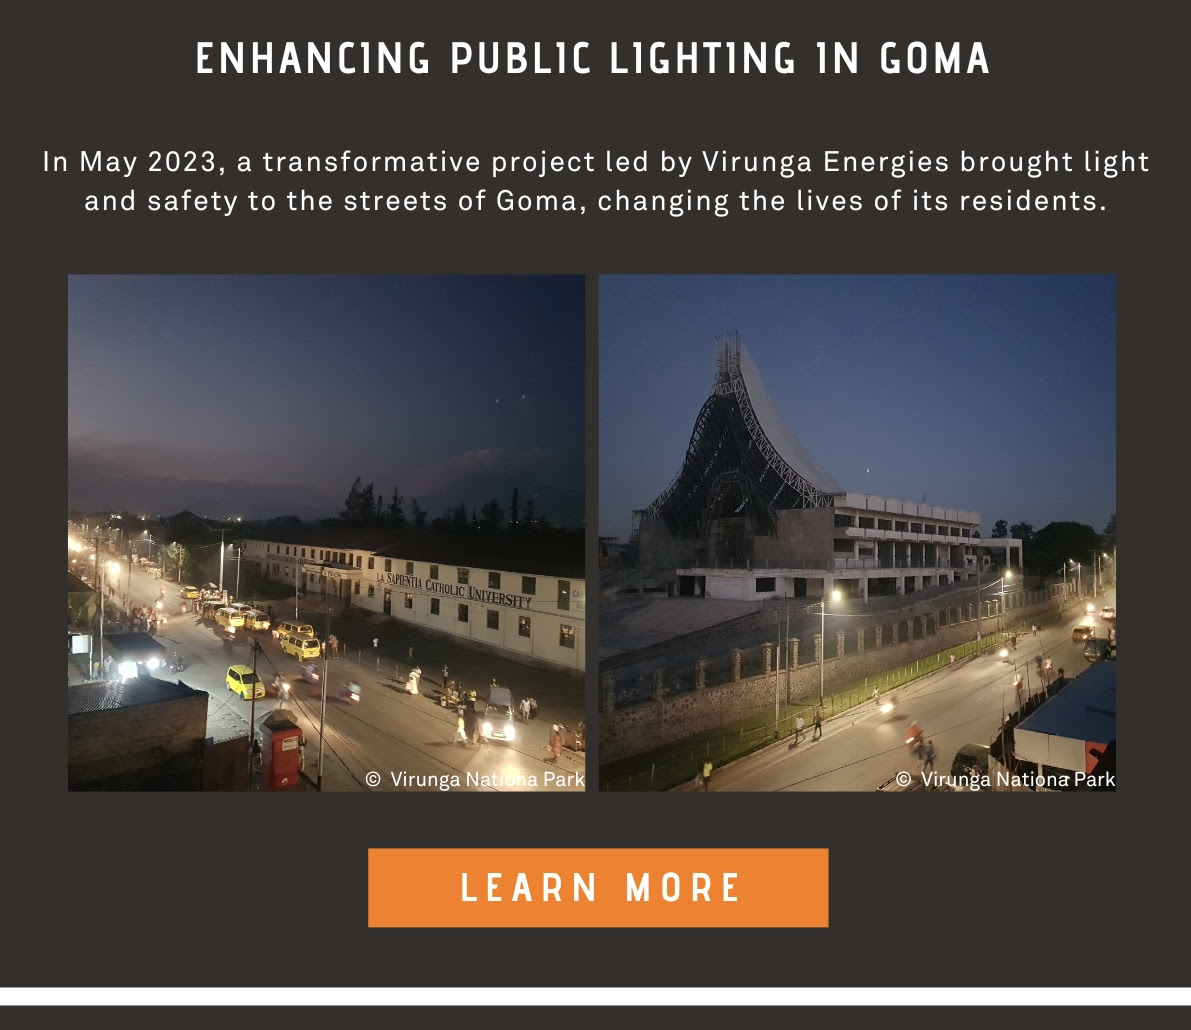 In May 2023, a transformative project led by Virunga Energies brought light and safety to the streets of Goma, changing the lives of its residents.